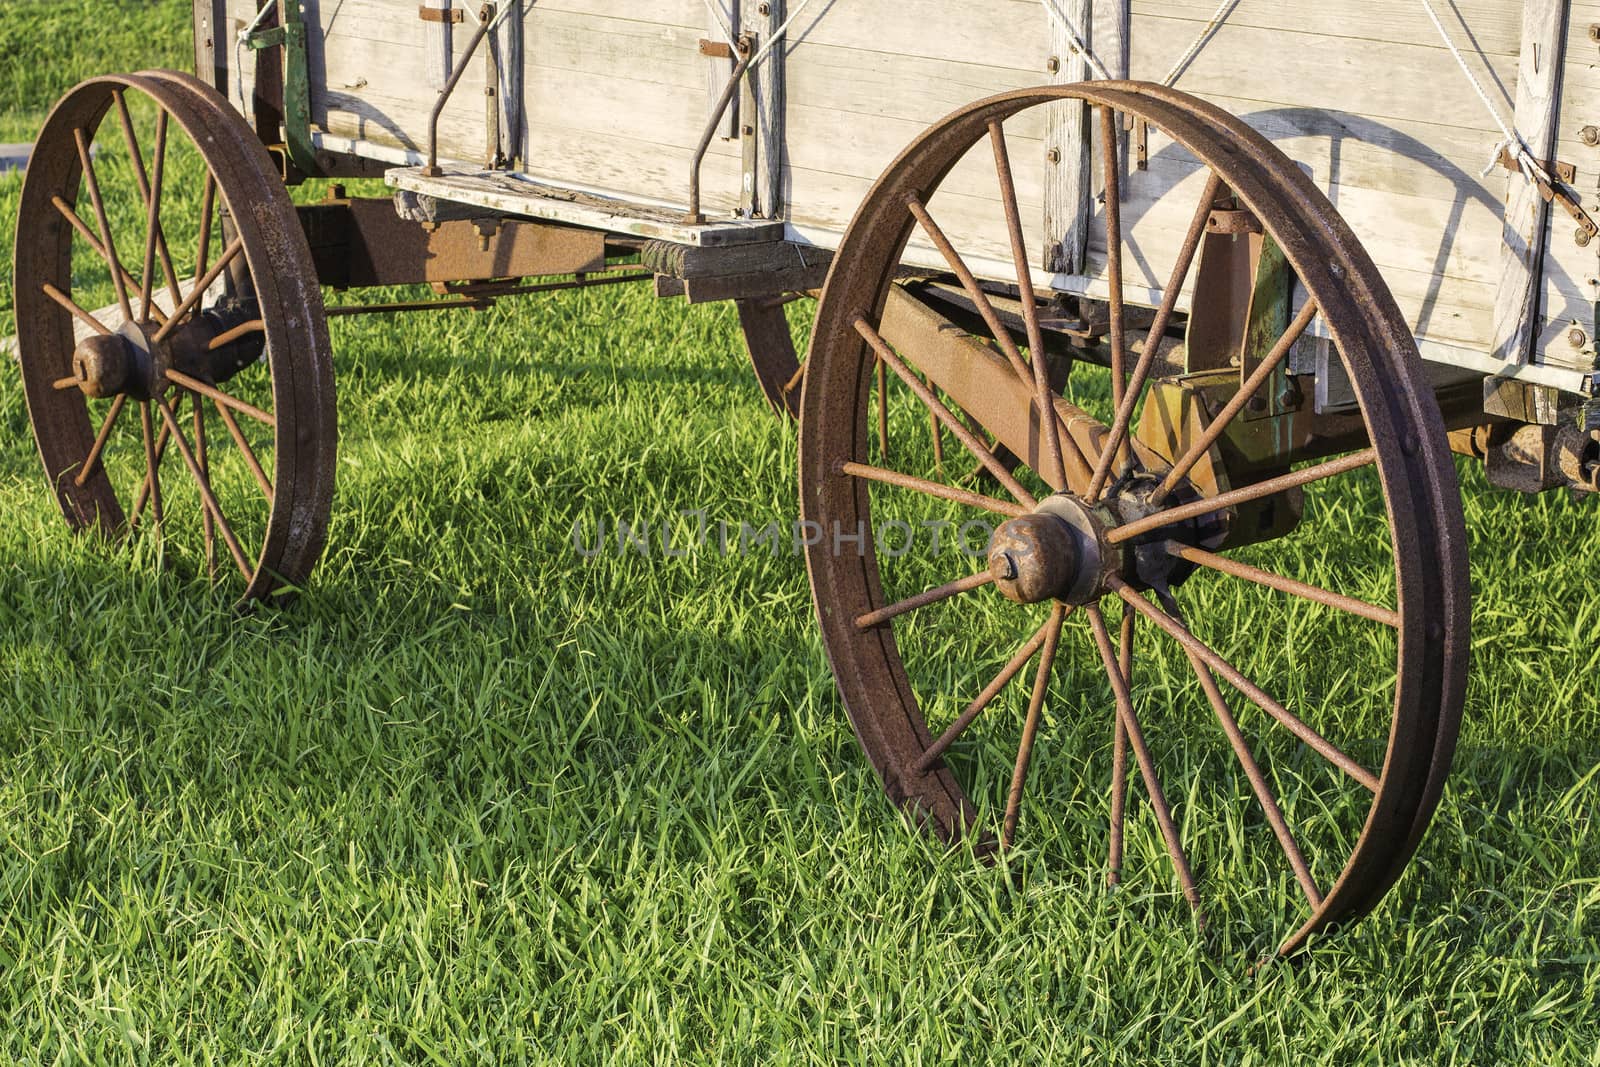 Side view of 2 metal wagon wheels from an old stagecoach from the 1800s.